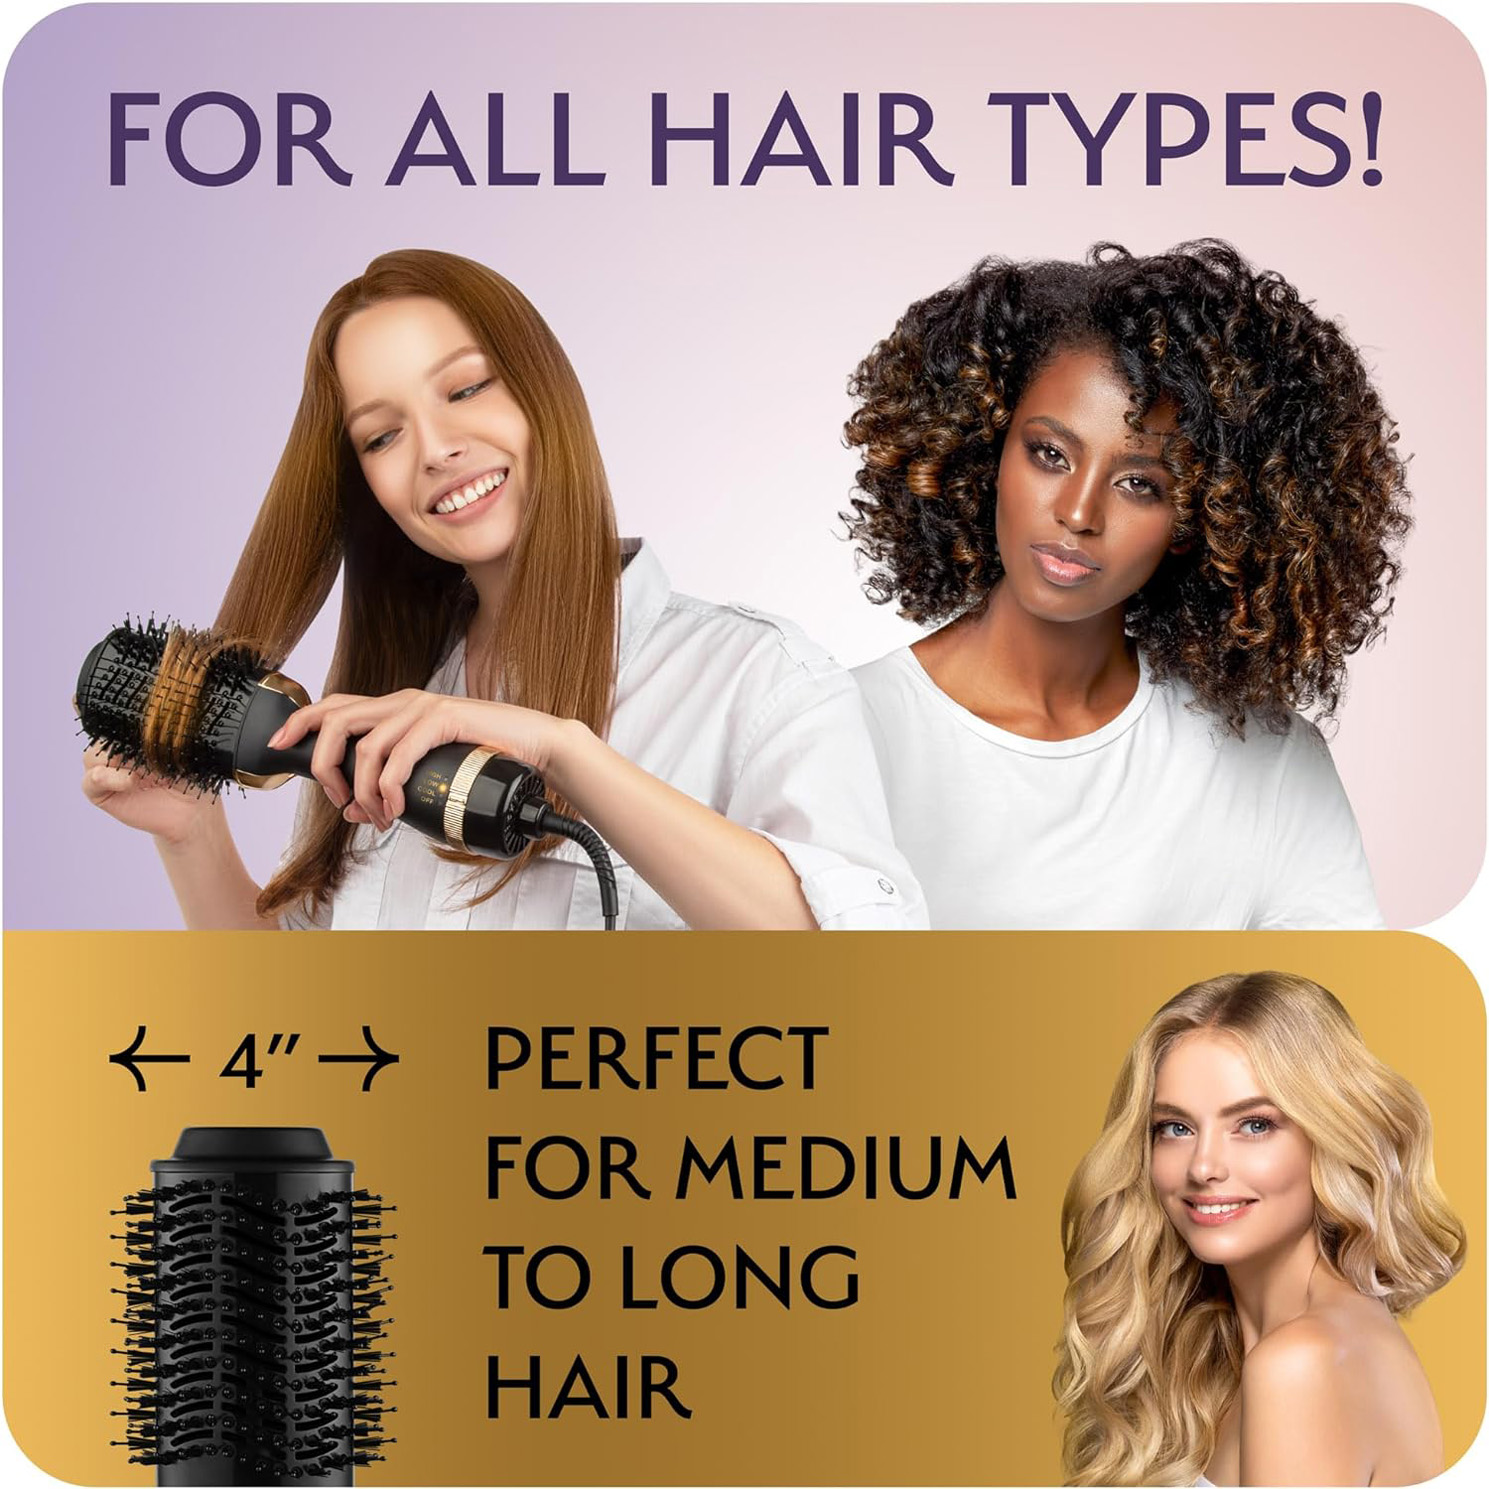 OMO TEAM Professional Blowout Hair Dryer Brush, Black Gold Dryer and Volumizer, Hot Air Brush for Women, 75MM Oval Shape